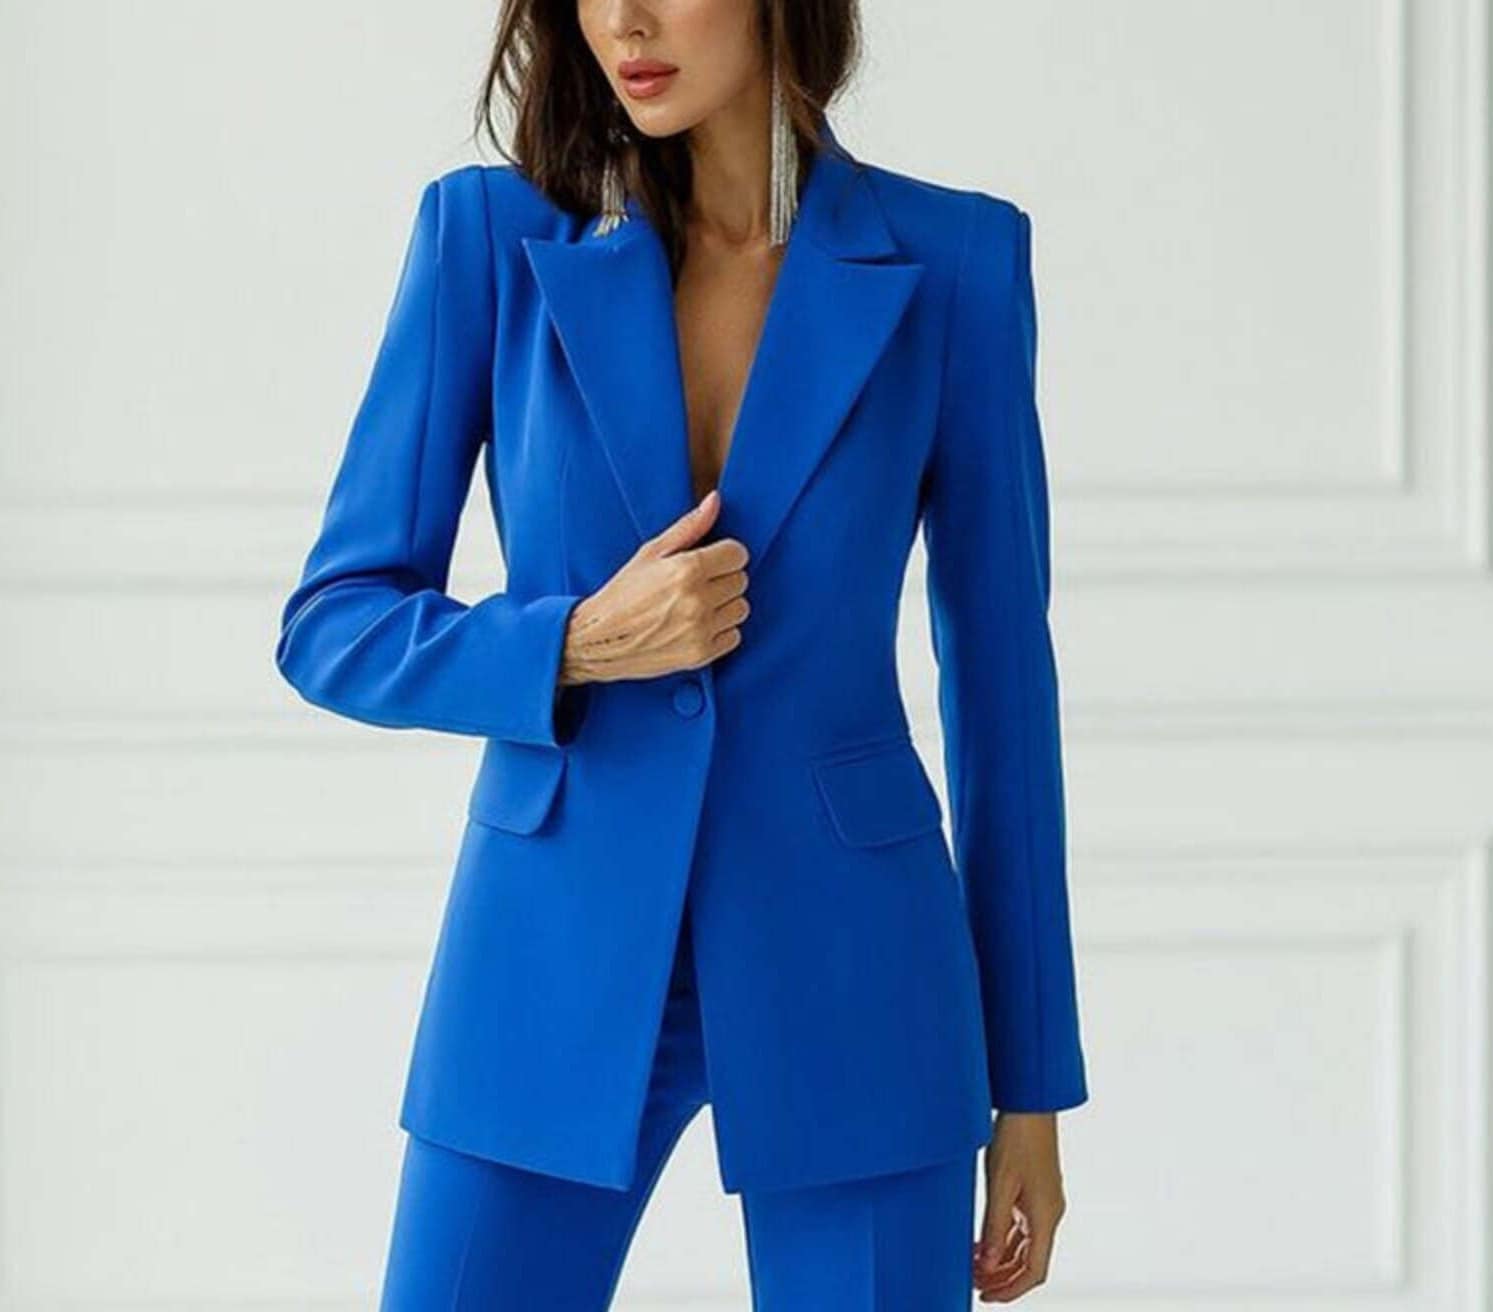 Women Royal Blue Business Suit With Bell Bottom Trouser for Prom, Work ...